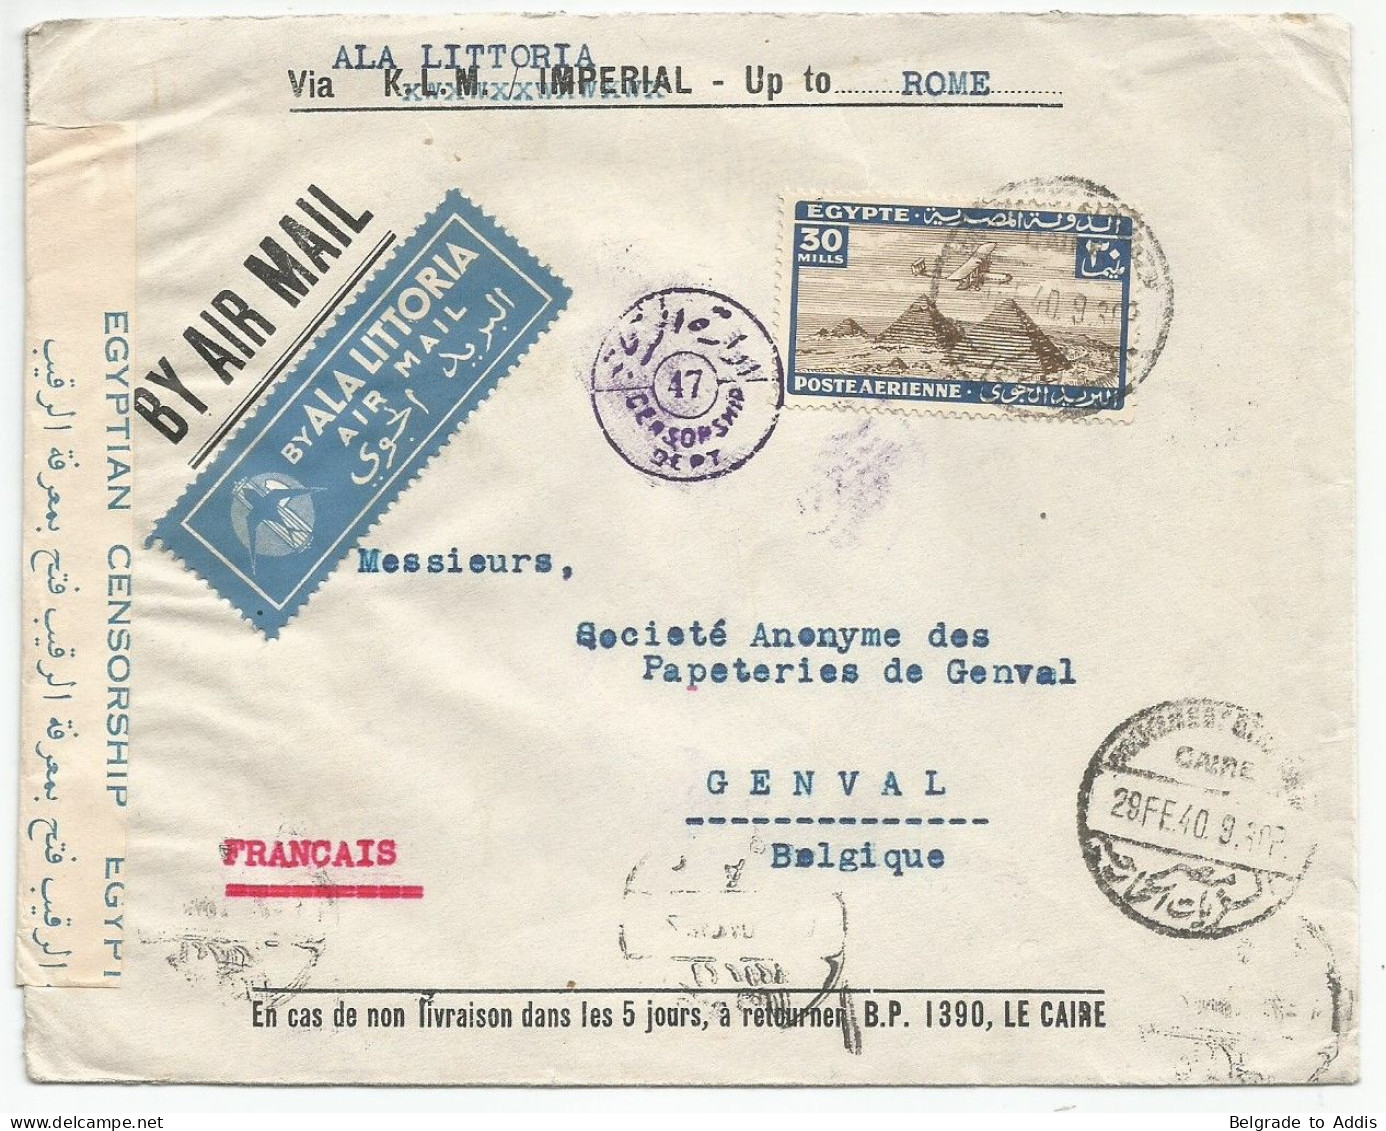 Egypt Air Mail Censored Cover Sent By ALA LITTORIA Via Roma Italy To Belgium 1940 - Airmail